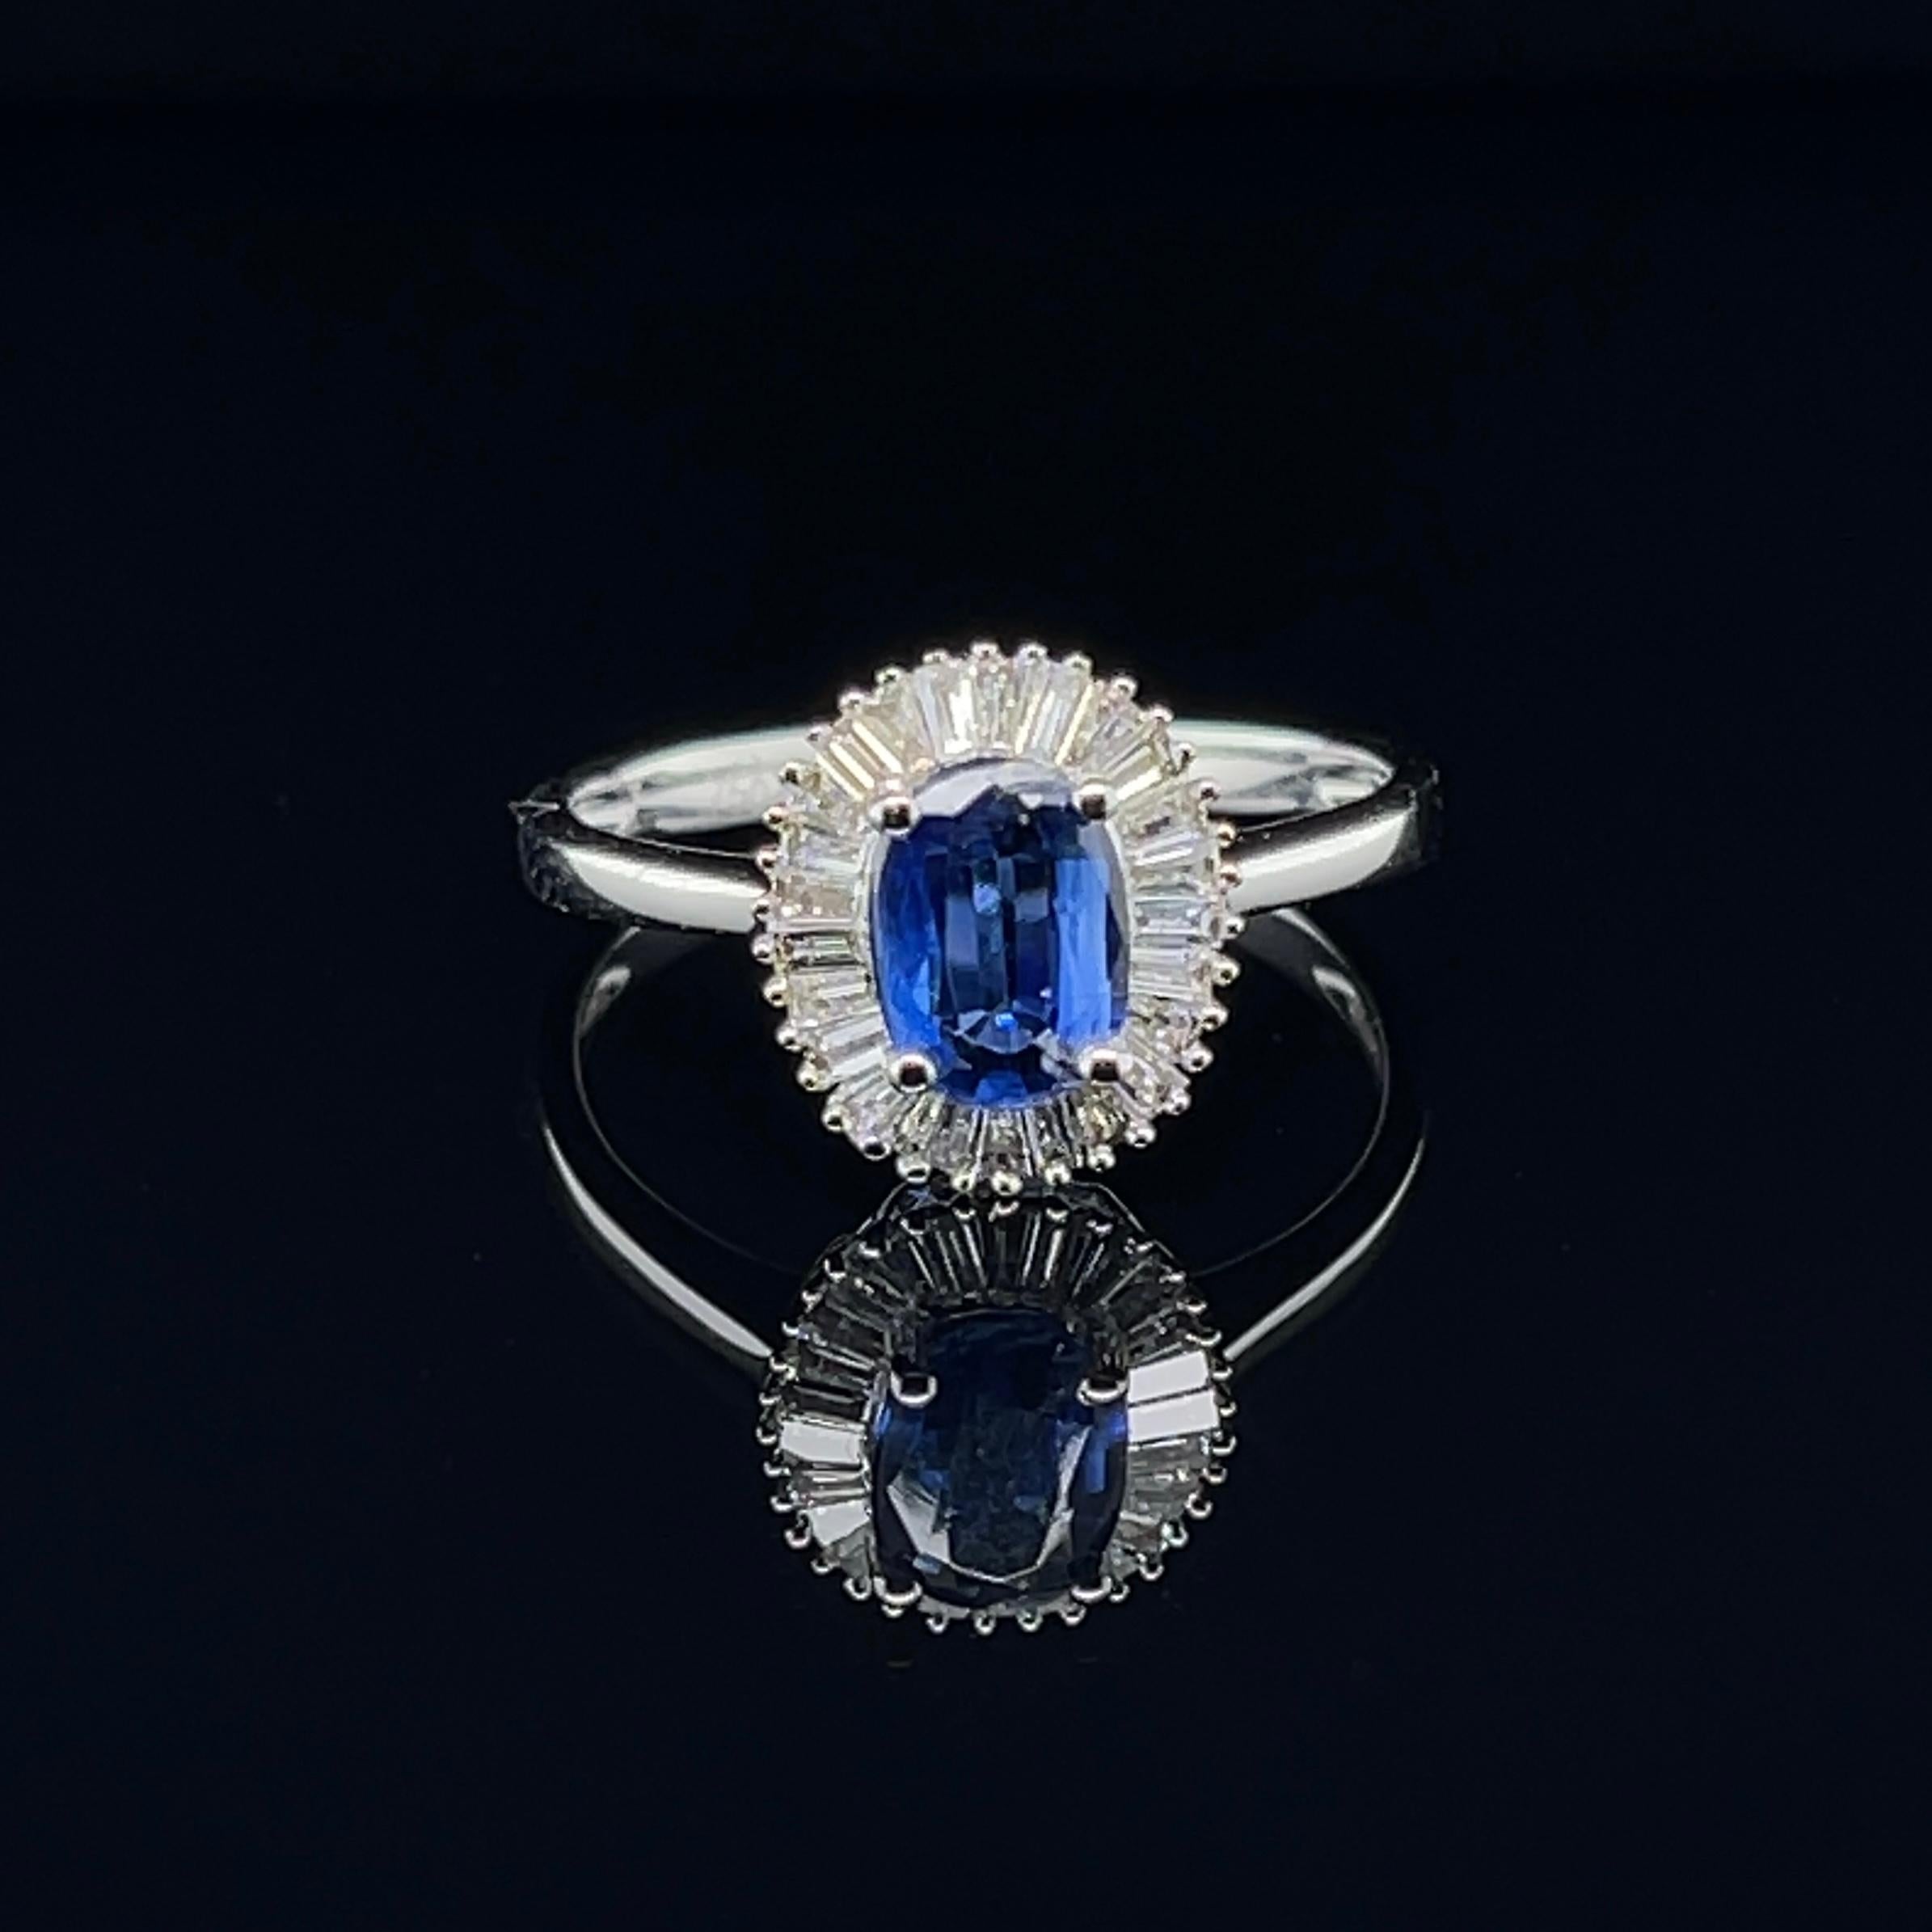 18ct White Gold Ring with 0.91ct Kyanite and Diamond